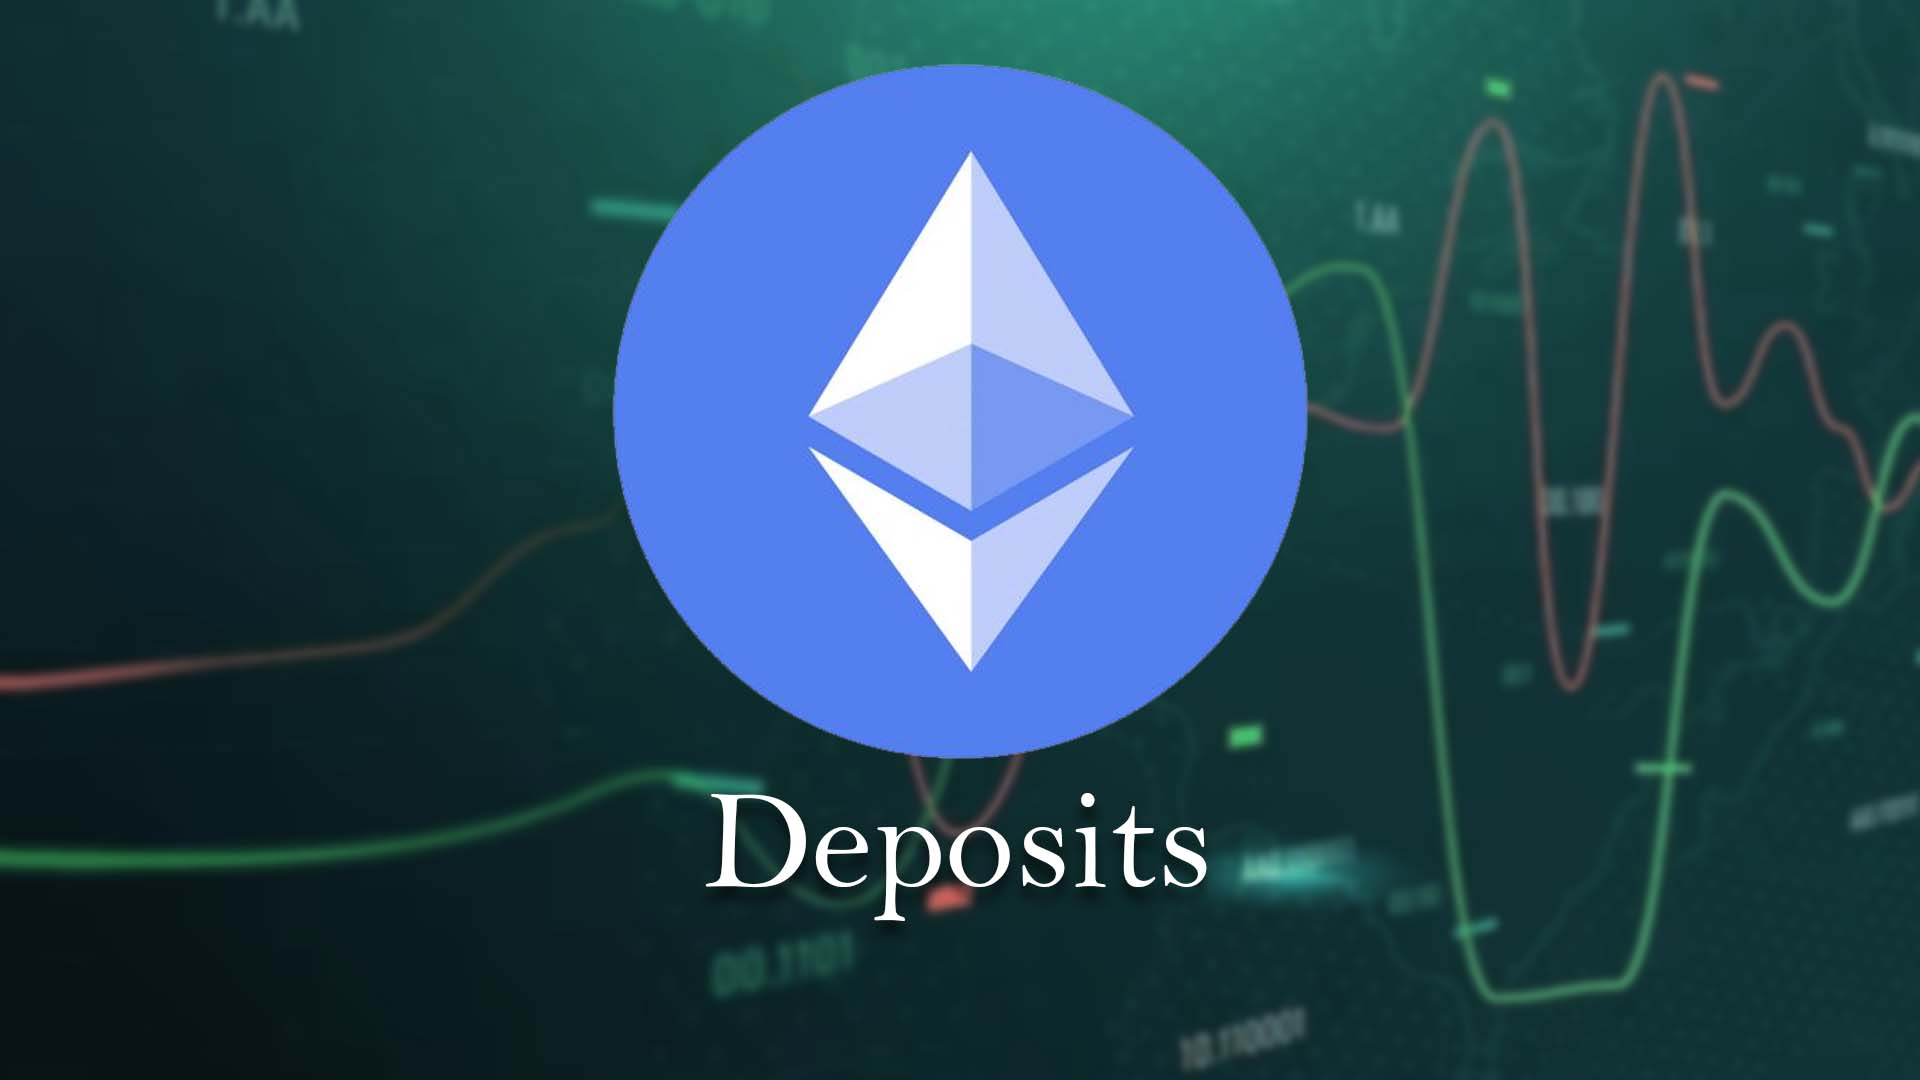 ETH Deposits unable to match ETH Withdrawals even in 3rd Round